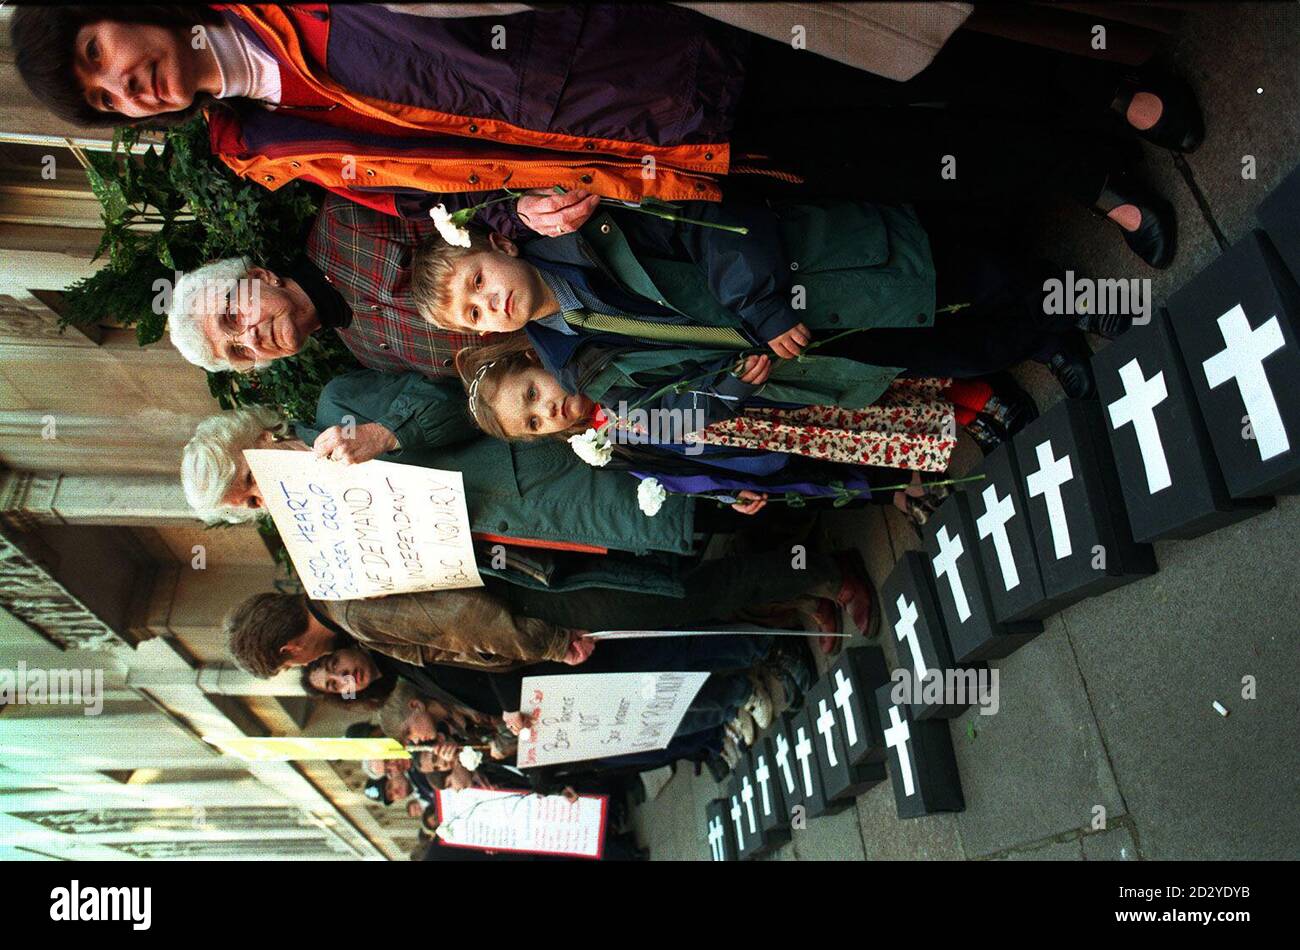 Protestors stand outside the General Medical Council, in London, with other families and their supporters who are demanding a public inquiry into why 68 children have died or been left brain damaged following heart surgery at Bristol Royal Infirmary * Zoe, 5 and Jordan Curnow, 6 - whose 9 month-old sister, Verity, died after undergoing heart surgery at the hospital. Stock Photo